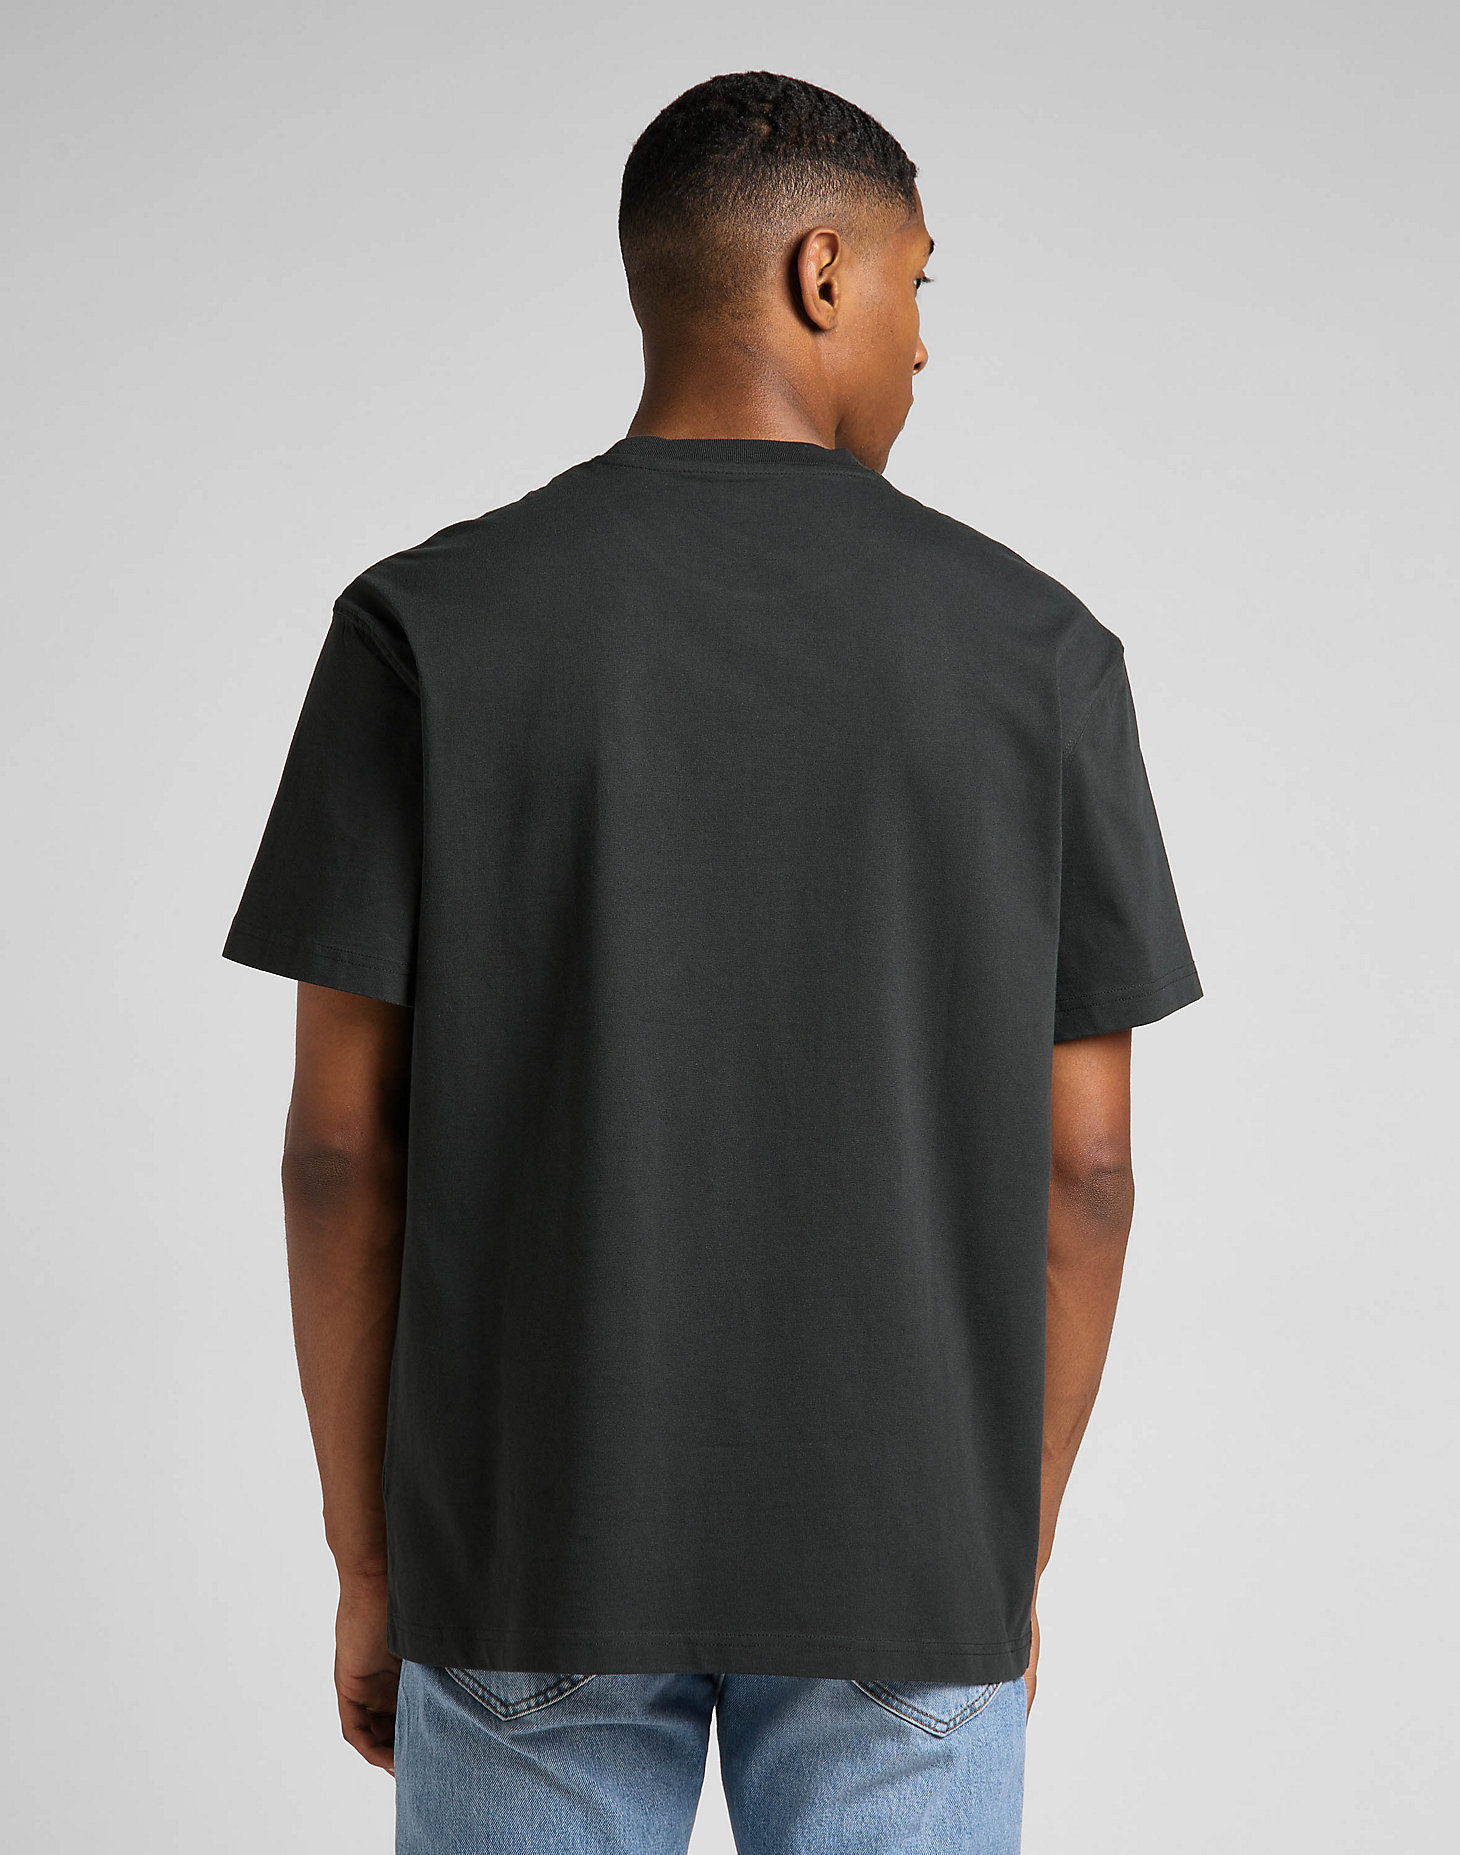 Loose Pocket Tee in Washed Black alternative view 1